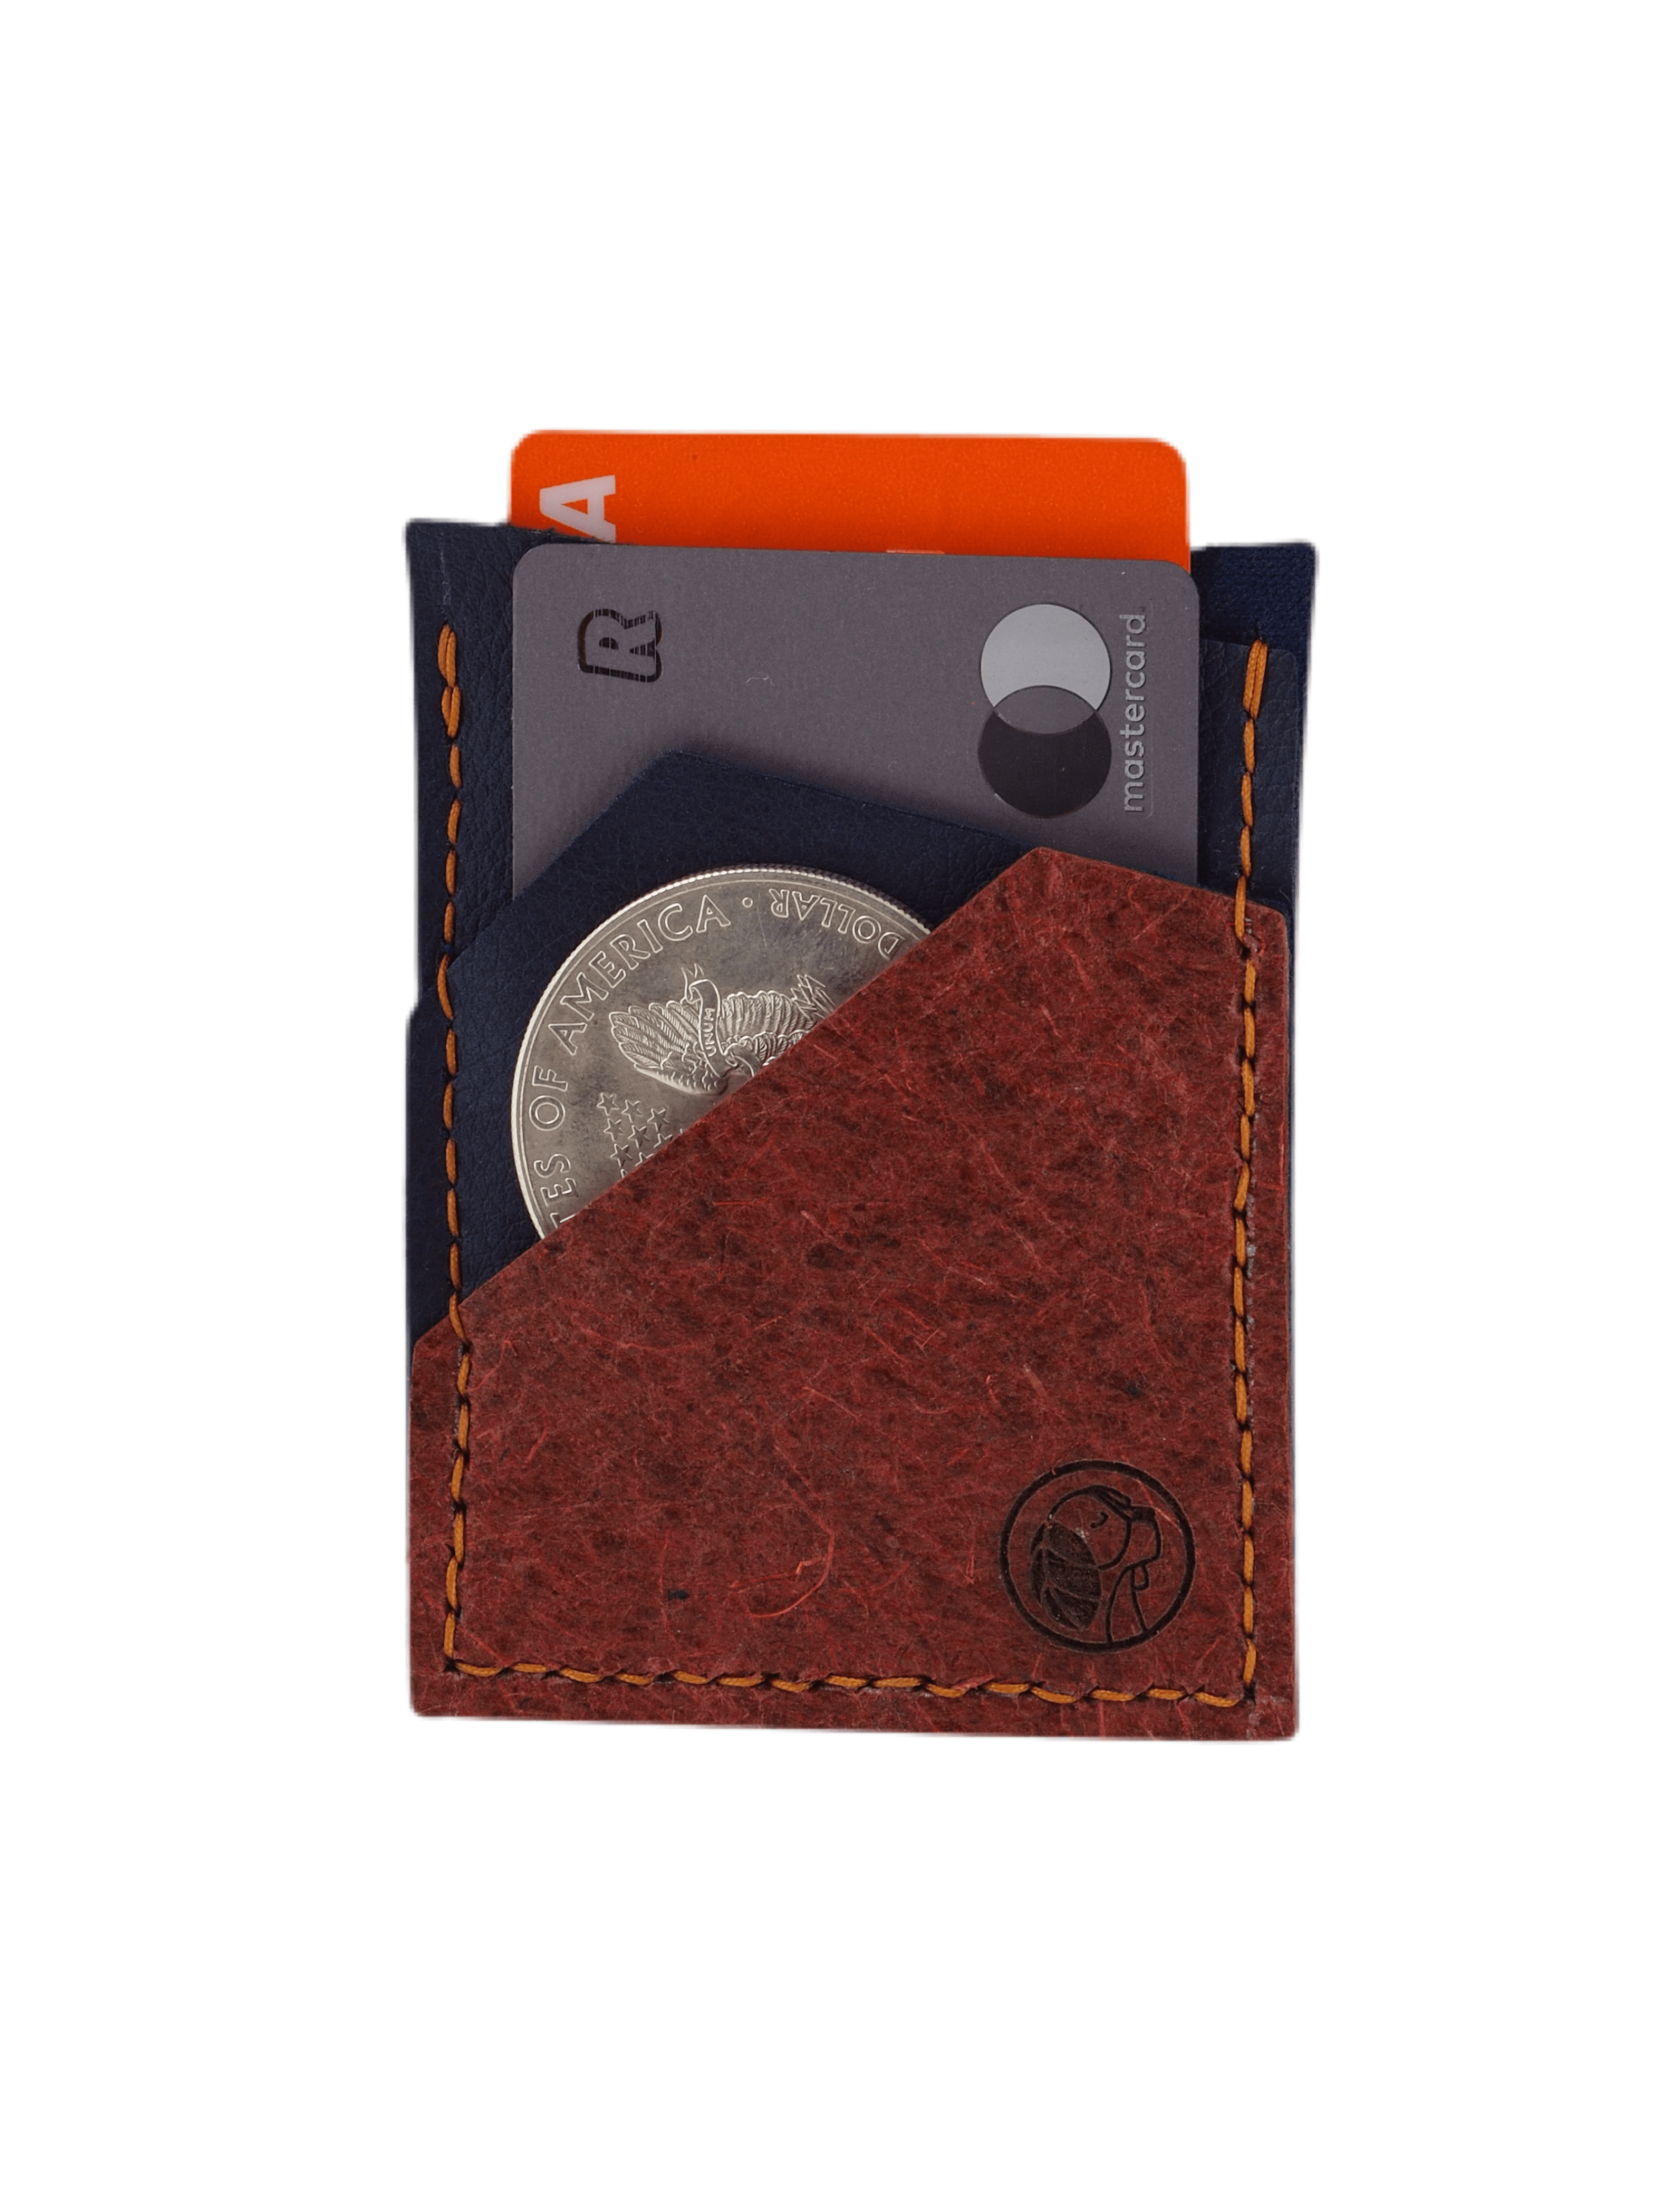 The image shows a slim cardholder made from cactus and mushroom vegan leather (plant-based materials). In the presentation, the cardholder includes cards and a silver coin. 